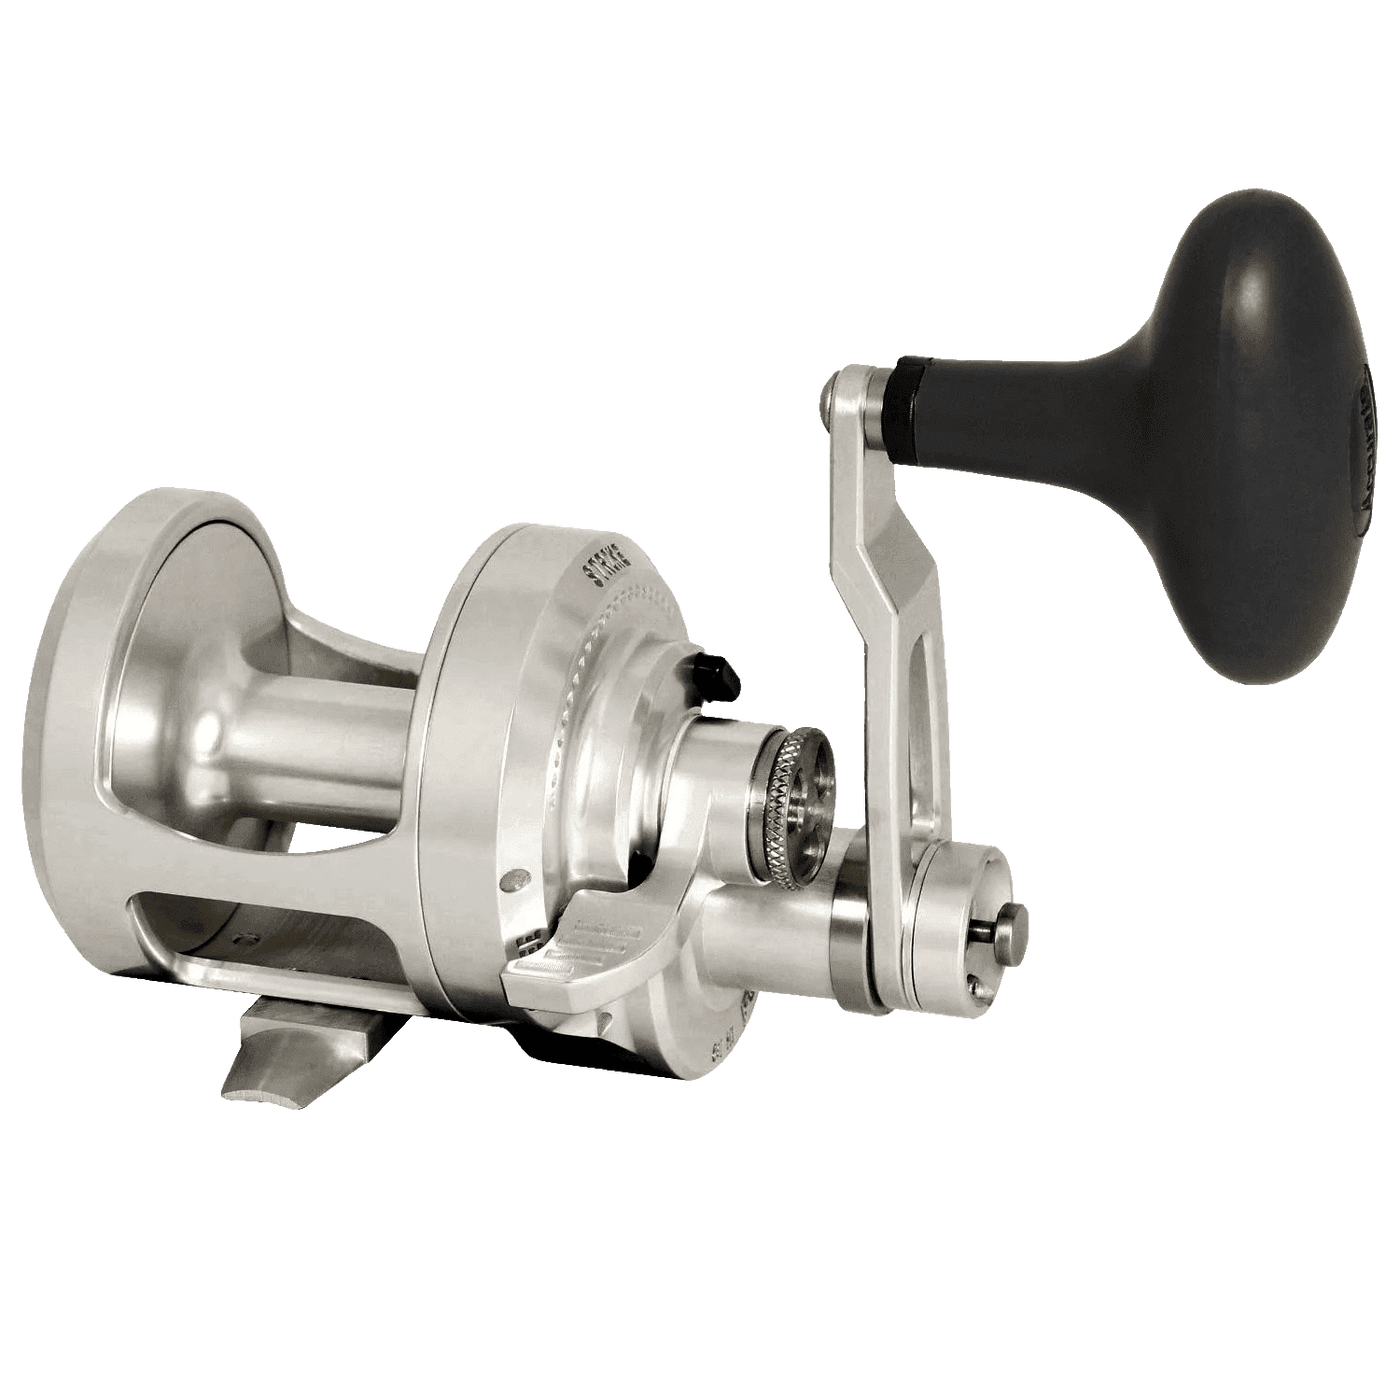 Accurate - Fury 2-Speed Lever Drag Reel